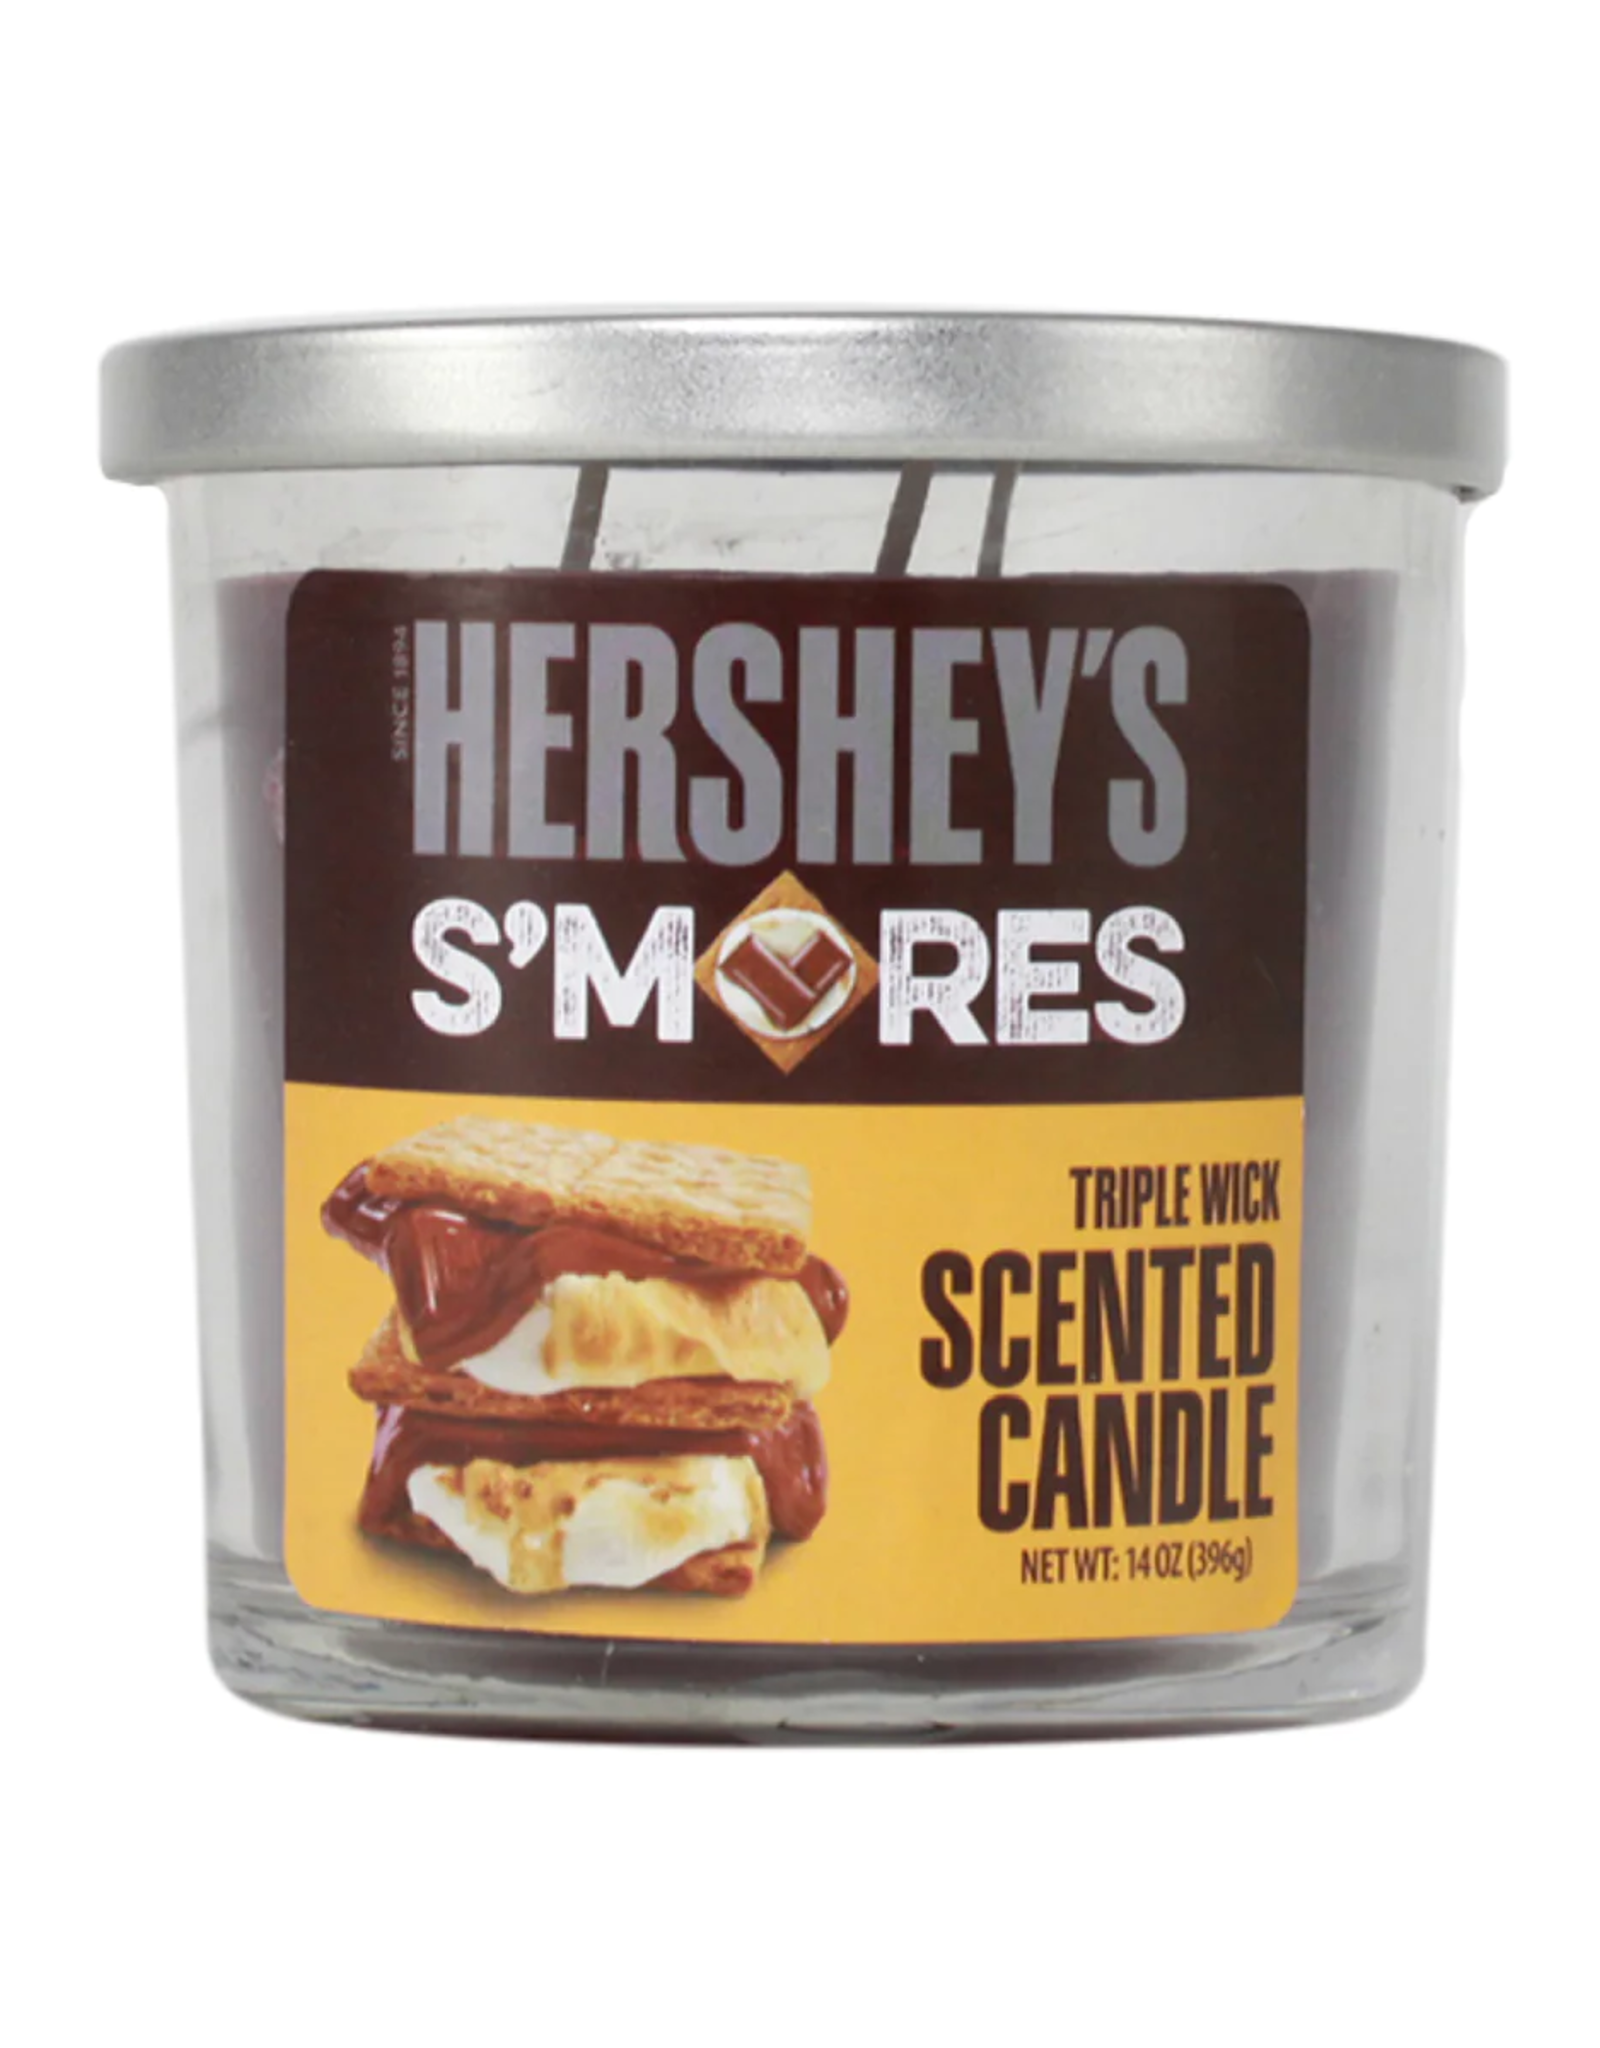 Hershey's Smores Sweet Tooth Candle - 14oz